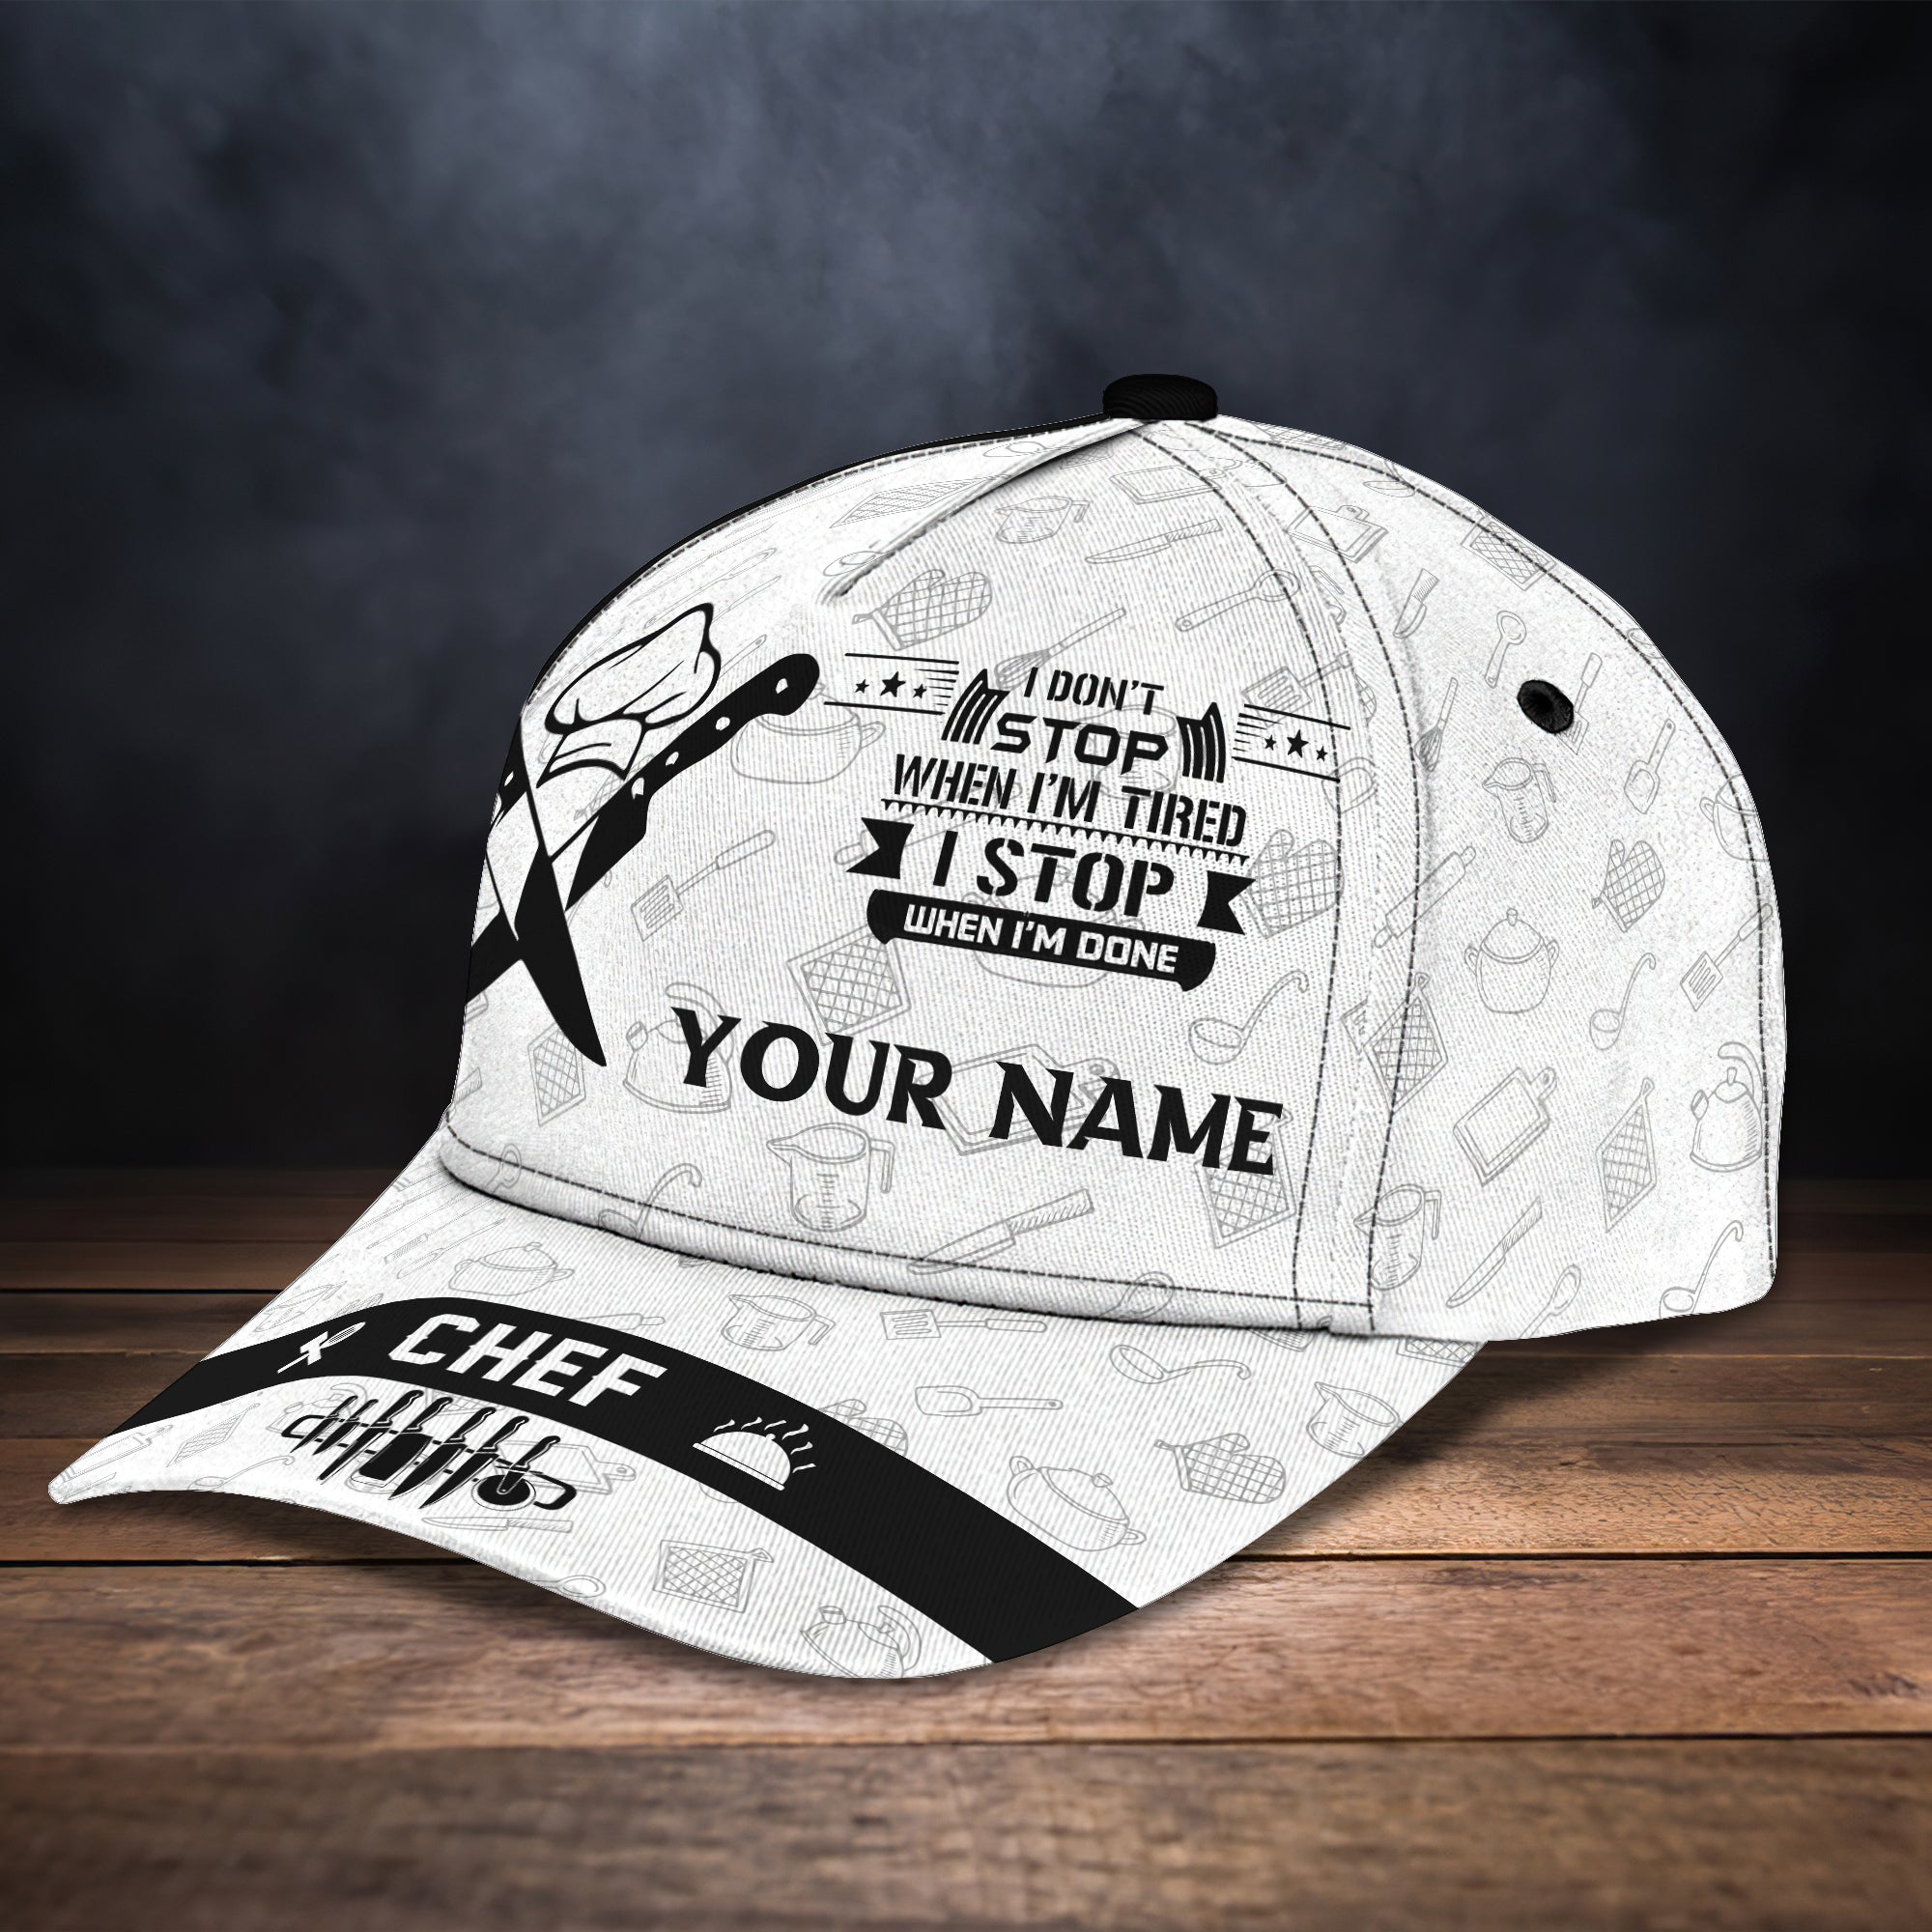 Chef - Personalized Name Cap 30 - TAD - Hkm